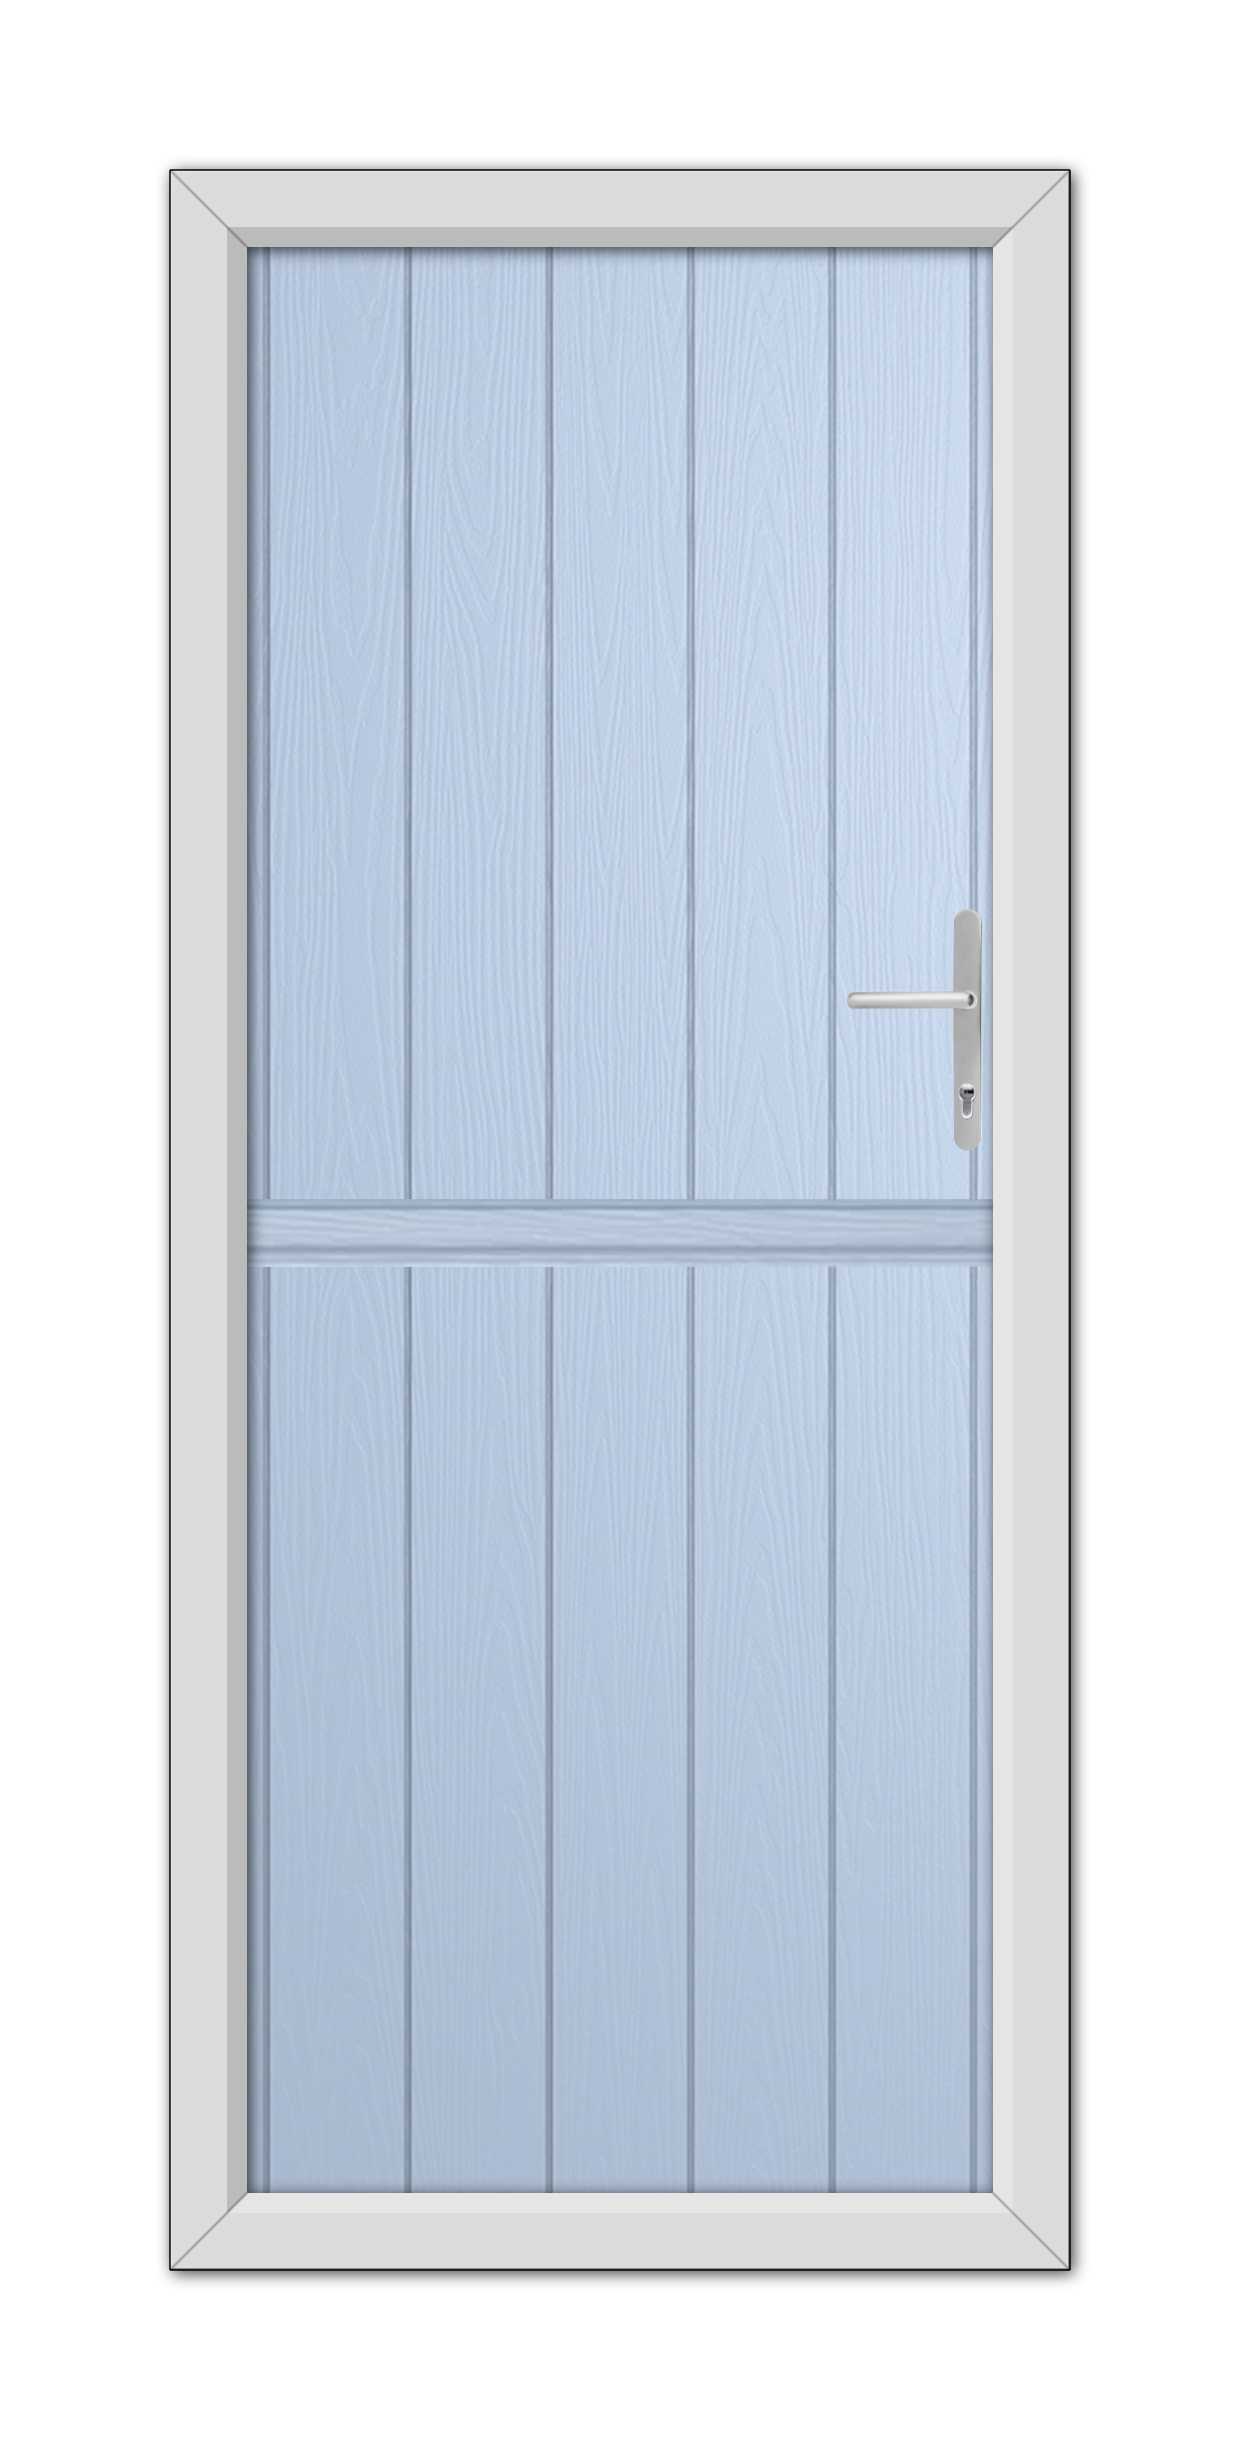 A Duck Egg Blue Norfolk Solid Stable Composite Door 48mm Timber Core with a metal handle, set within a white frame, featuring a horizontal window at its upper half.